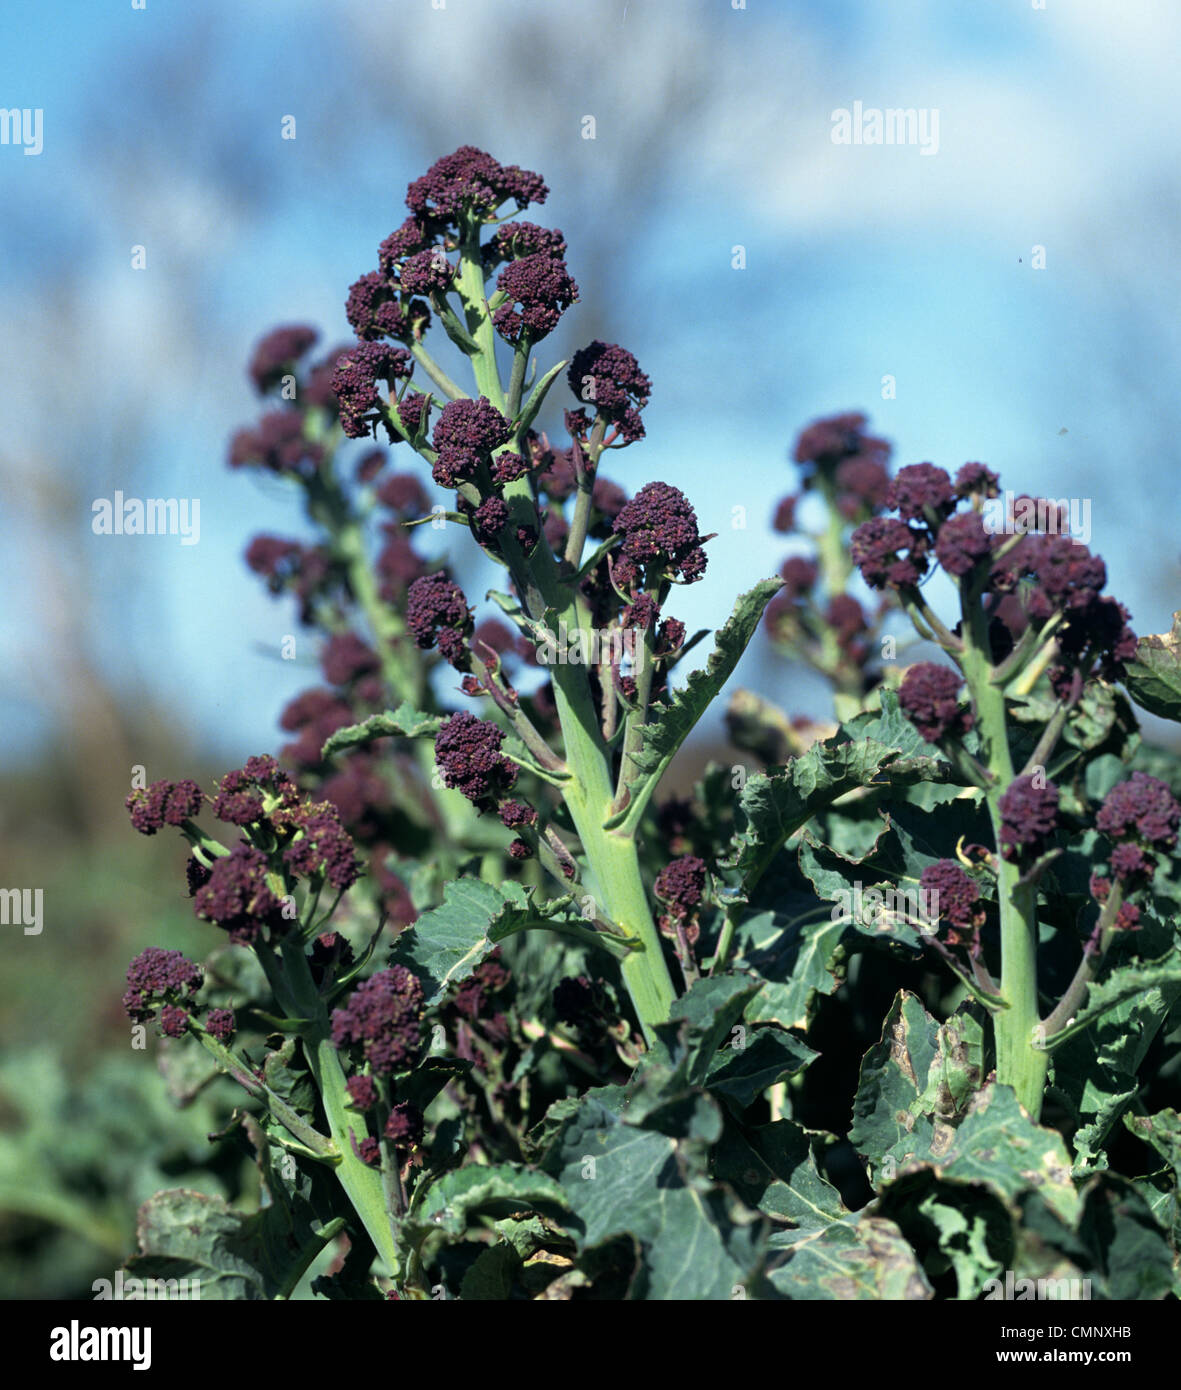 Purple sprouting broccoli (Brassica oleracea cv botrytis ) ready for picking Stock Photo